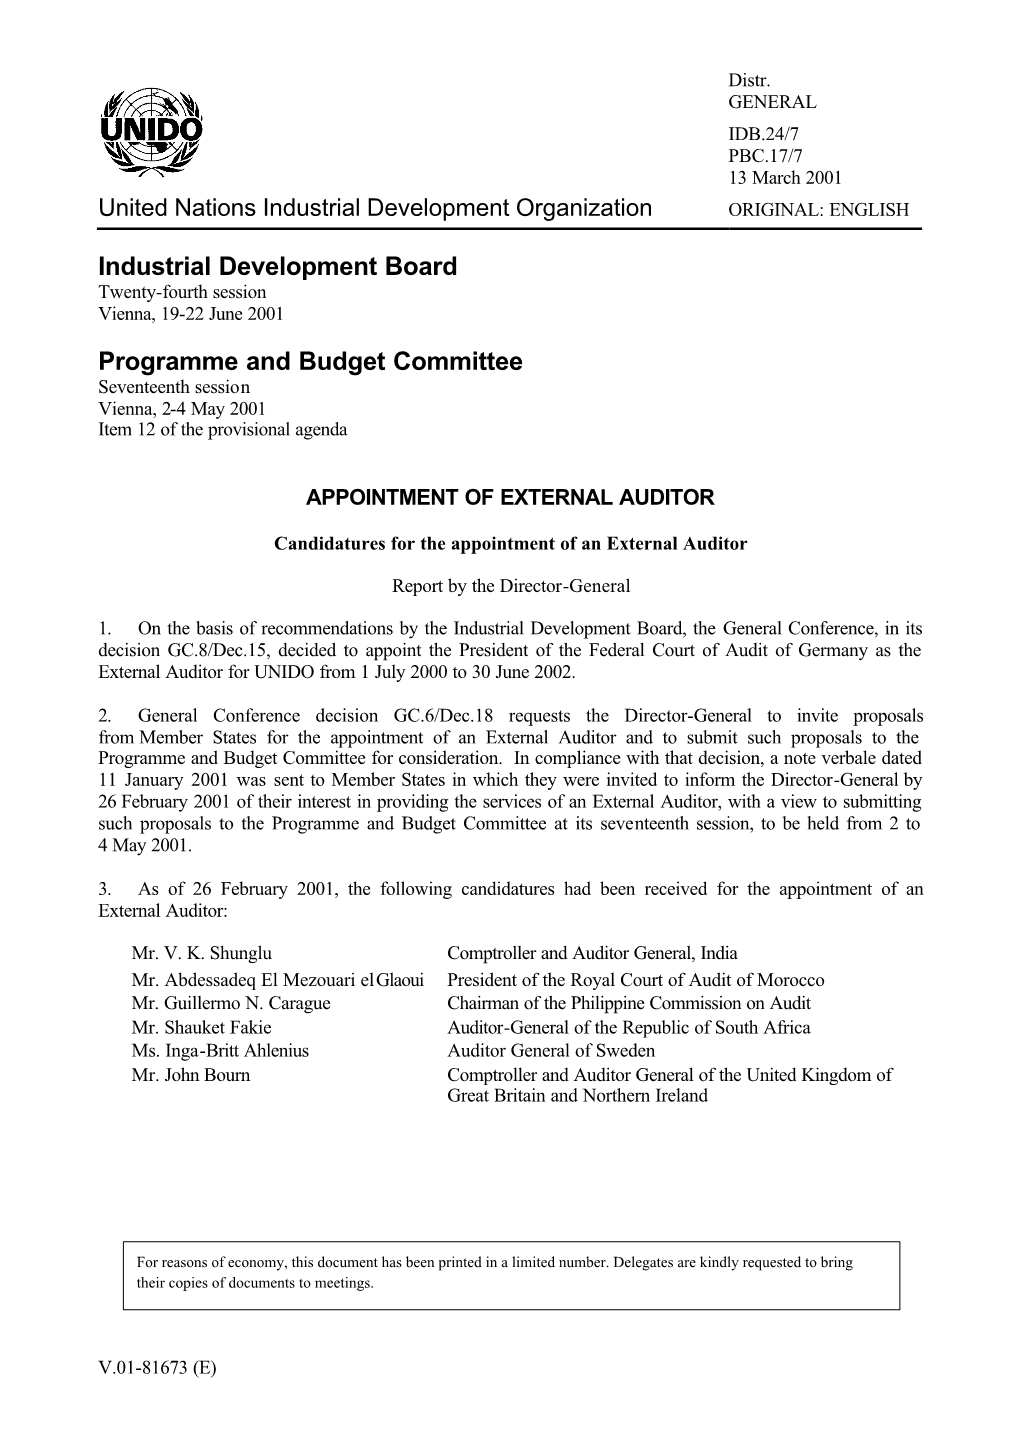 Industrial Development Board Programme and Budget Committee